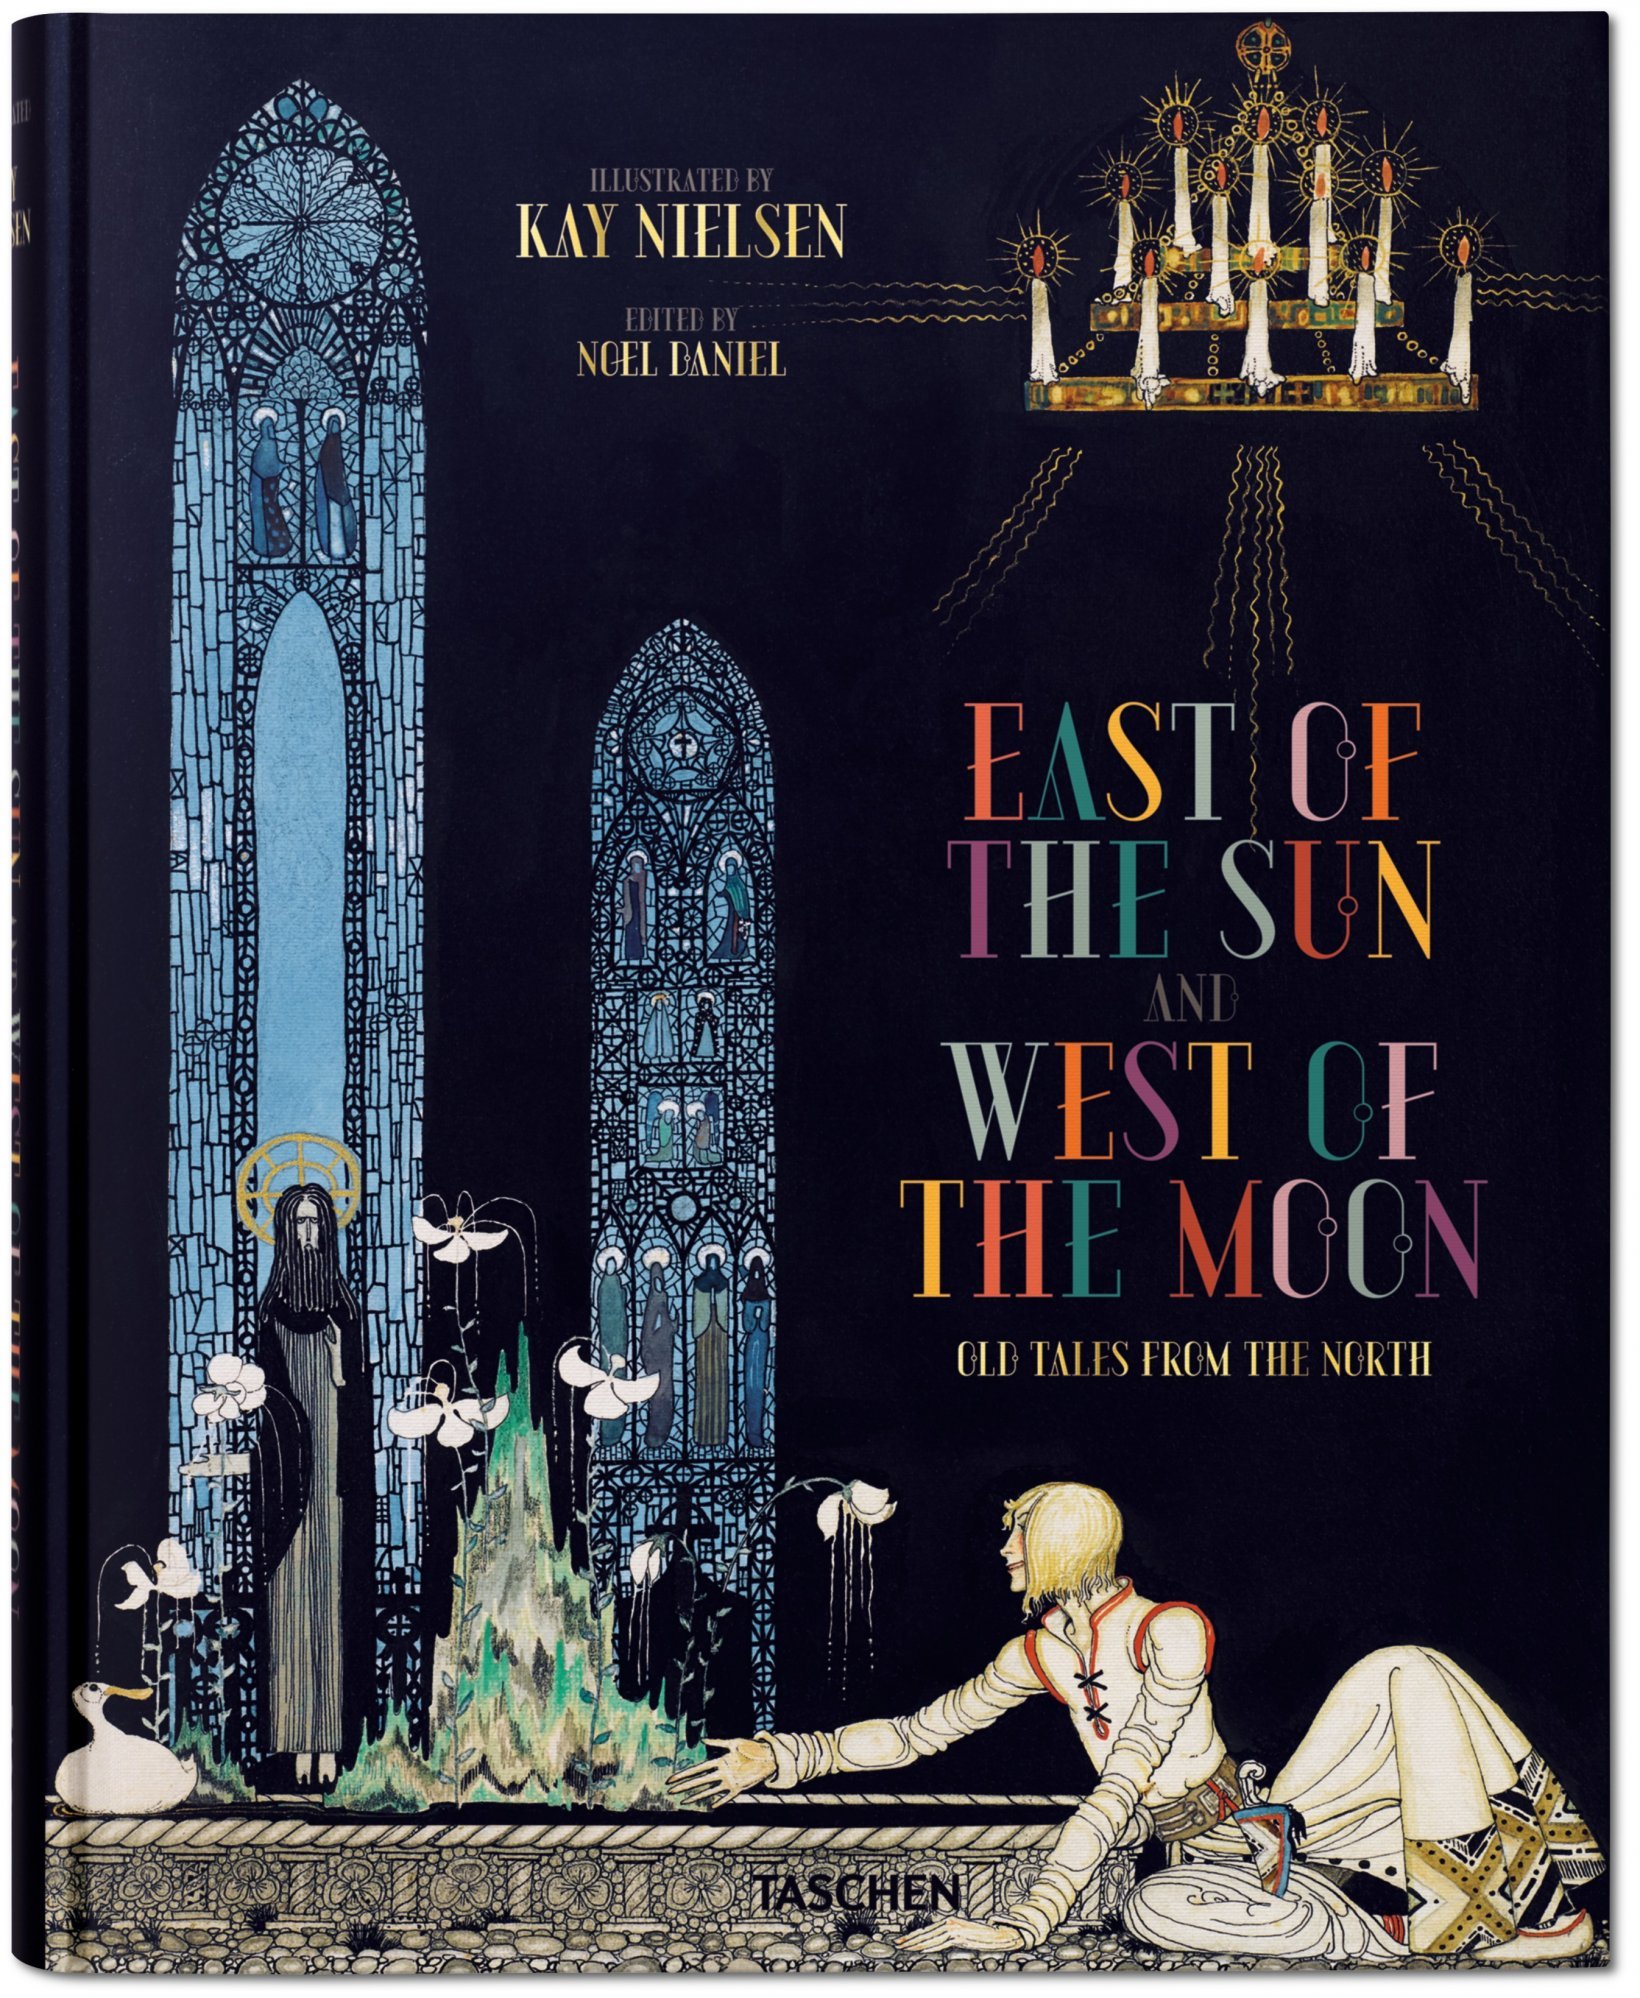 Kay Nielsen: East of the Sun and West of the Moon